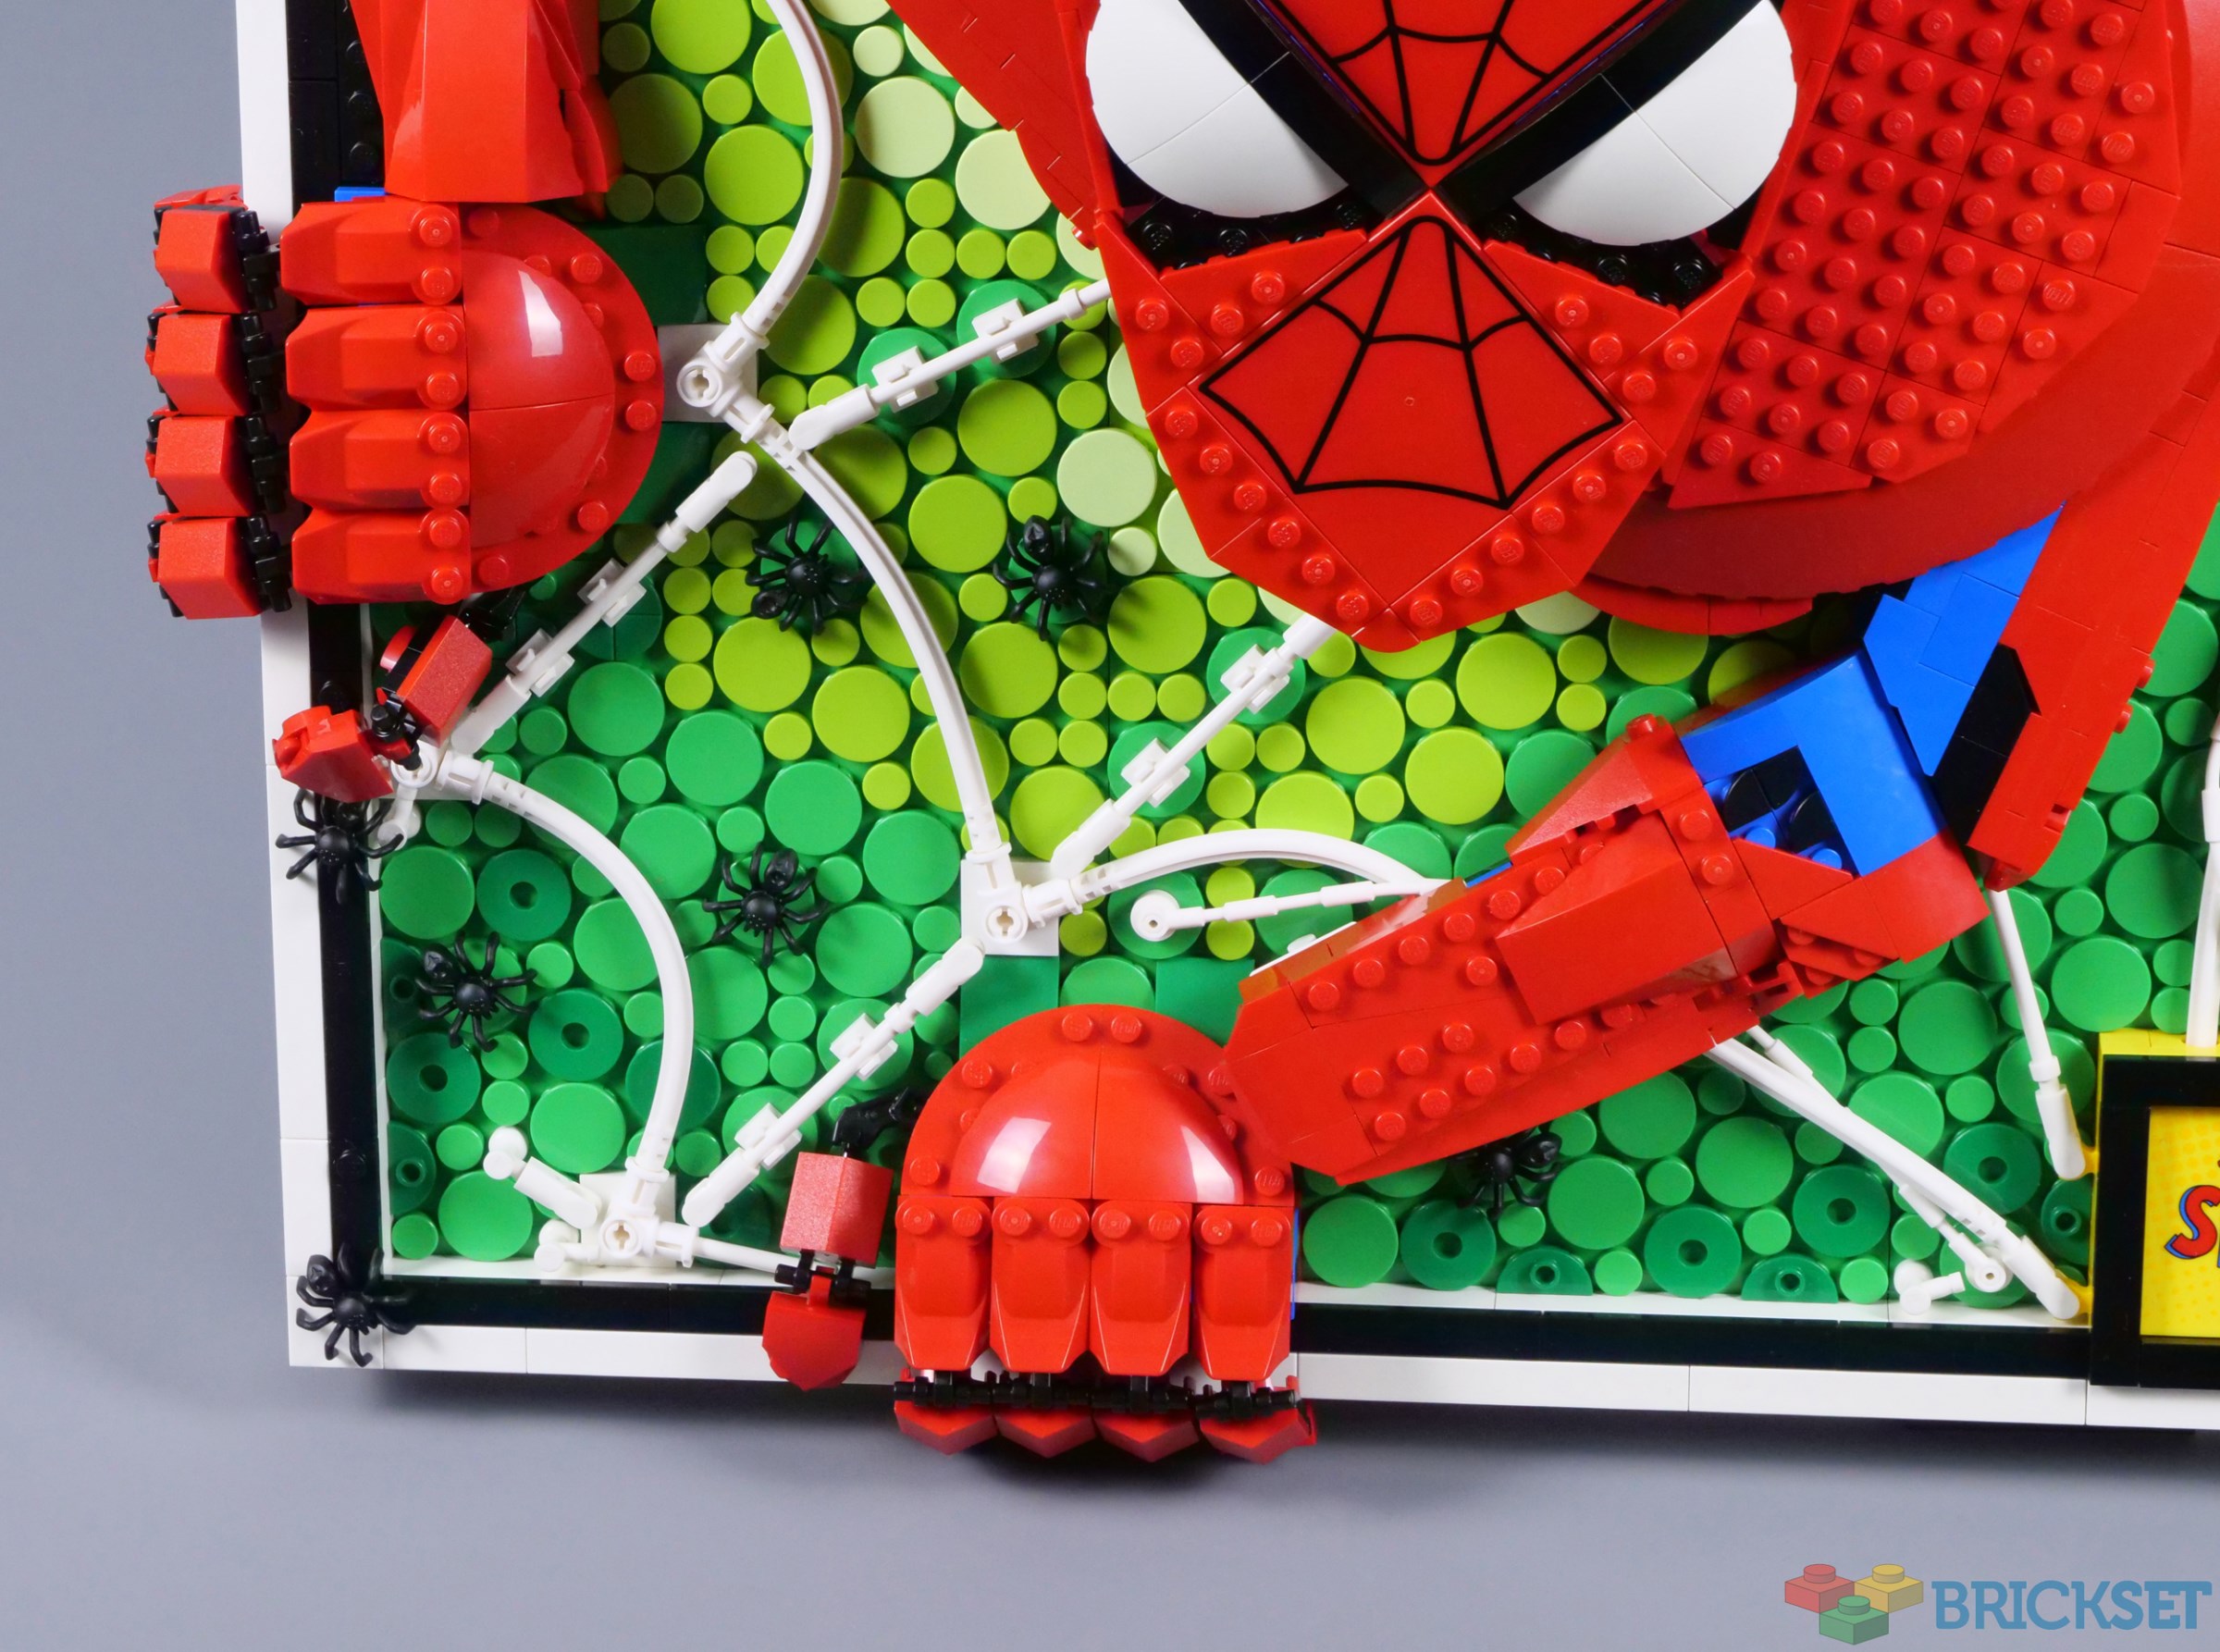 LEGO Art The Amazing Spider-Man (31209) Officially Revealed - The